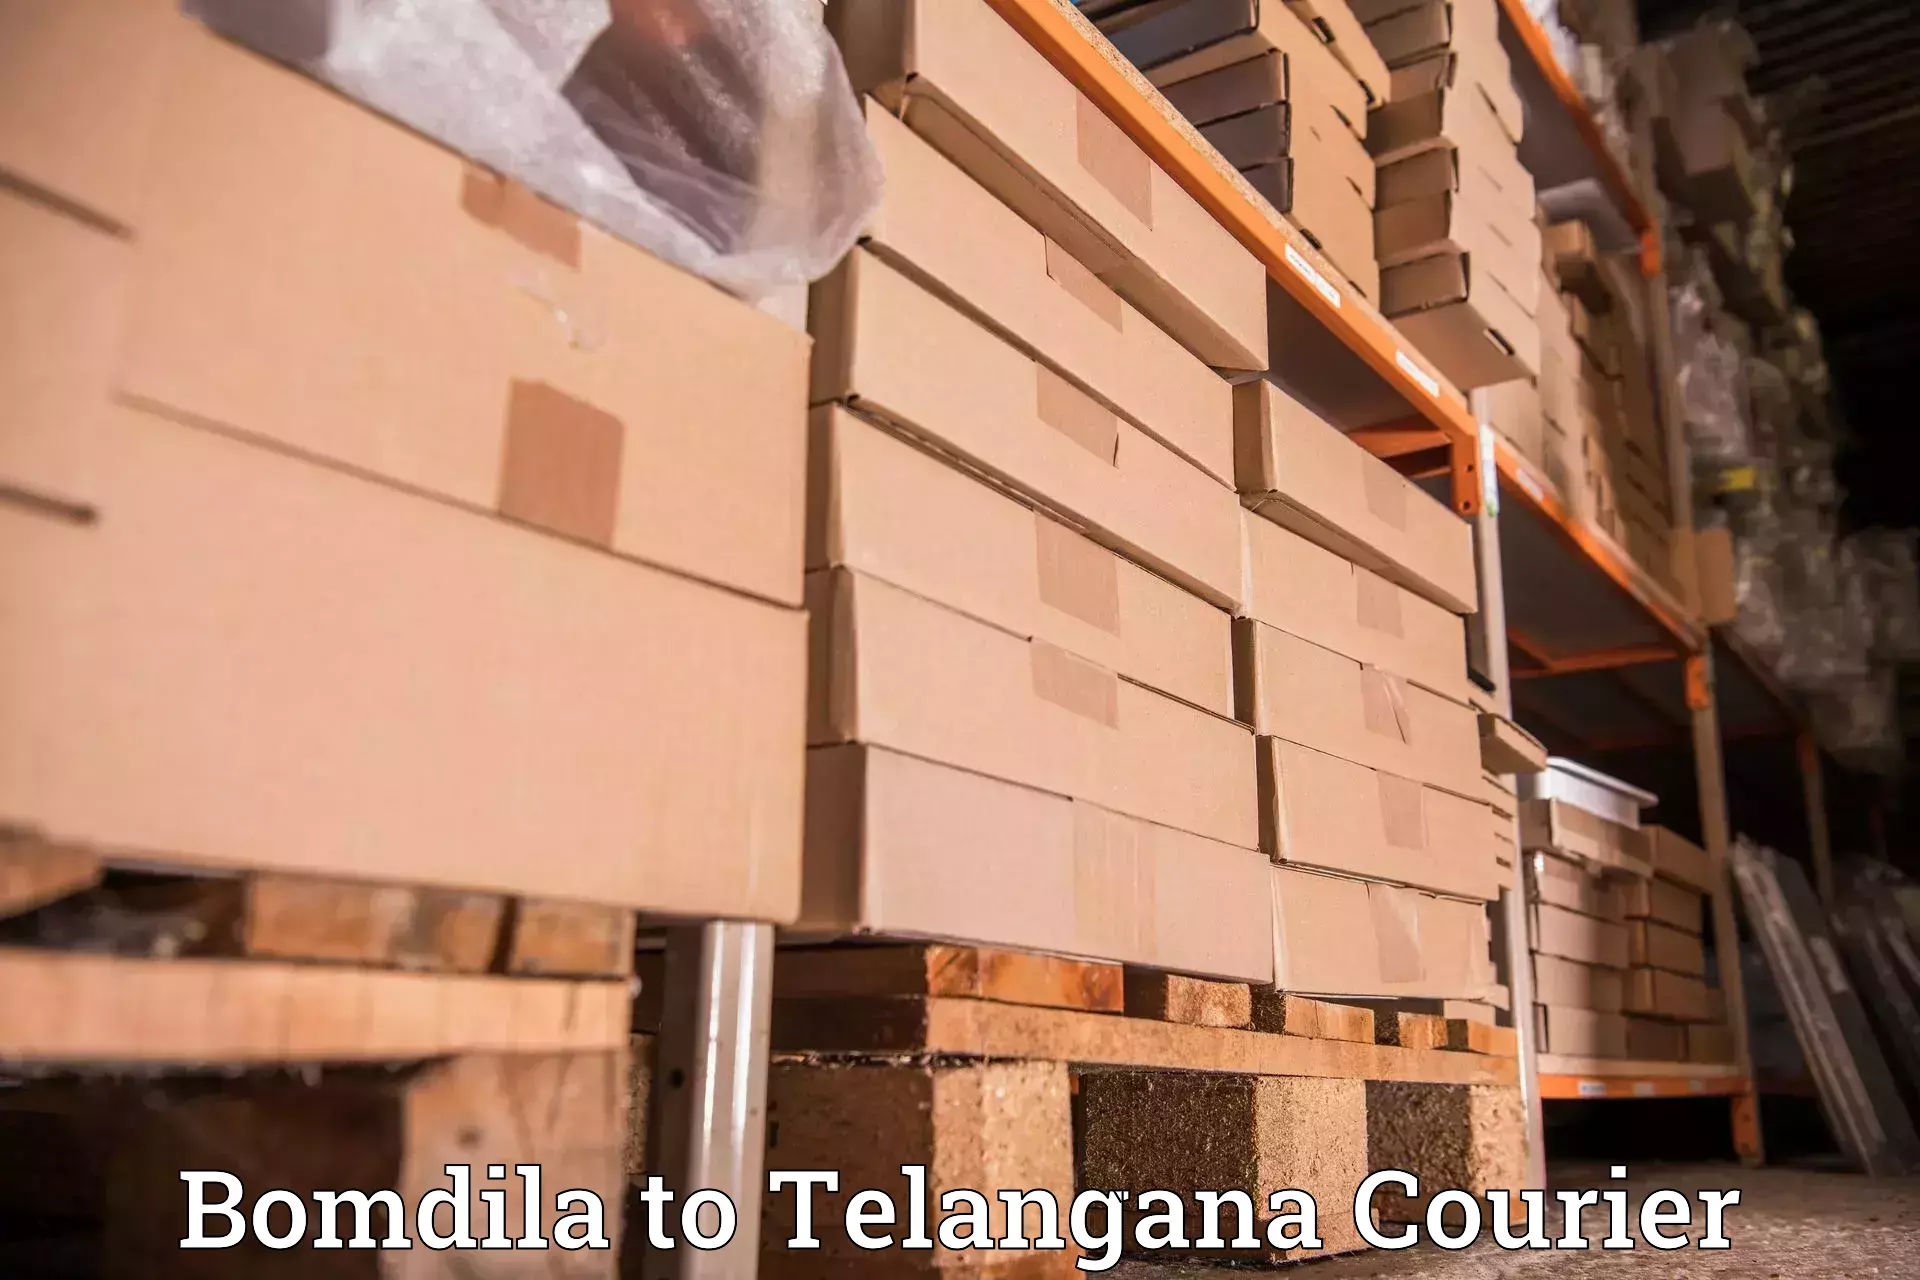 Overnight delivery services Bomdila to Gangadhara